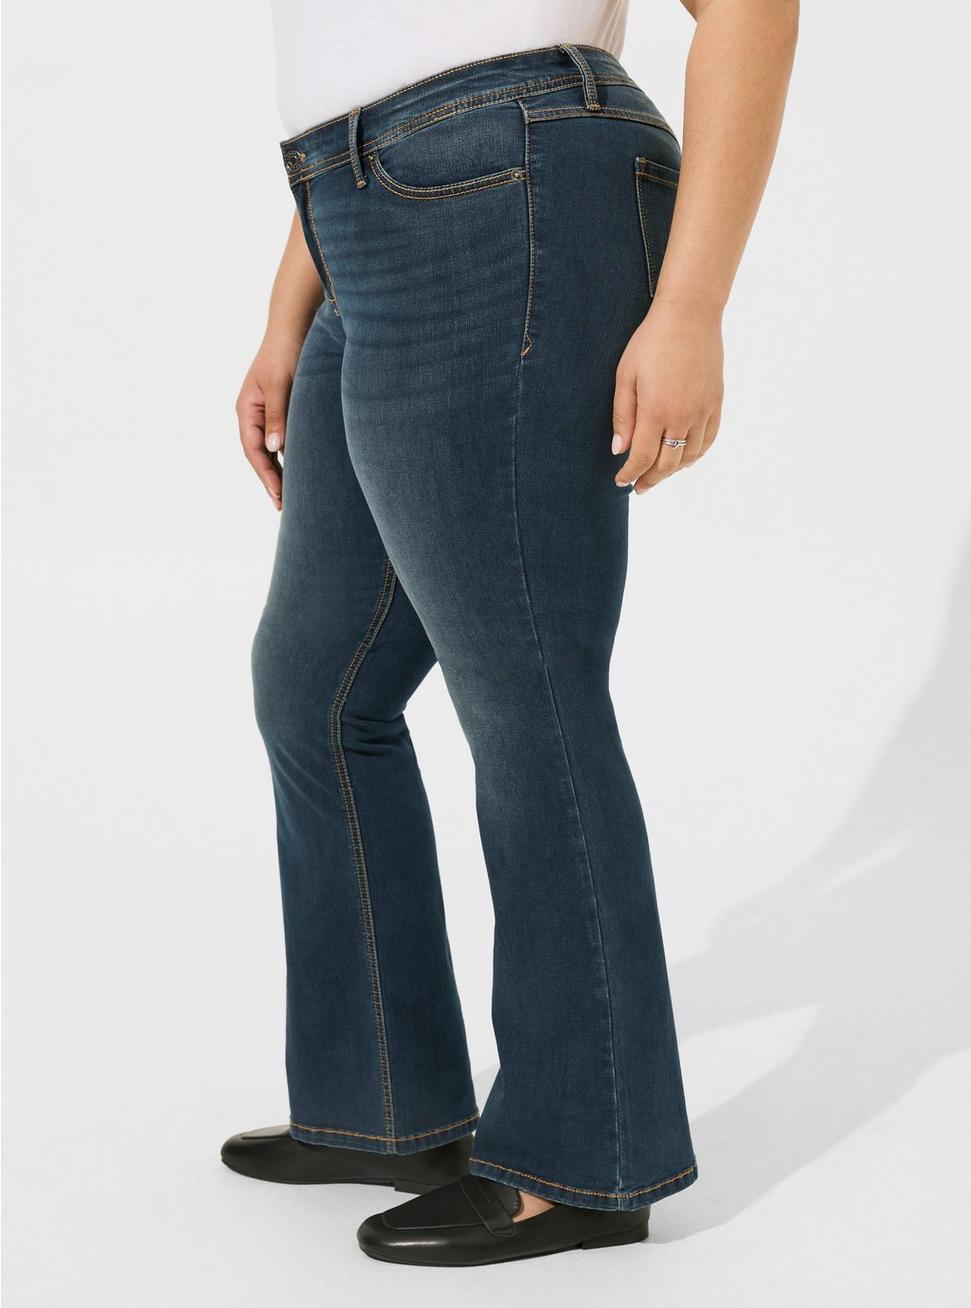 SPANX Medium Wash Boot Cut Jeans for Women